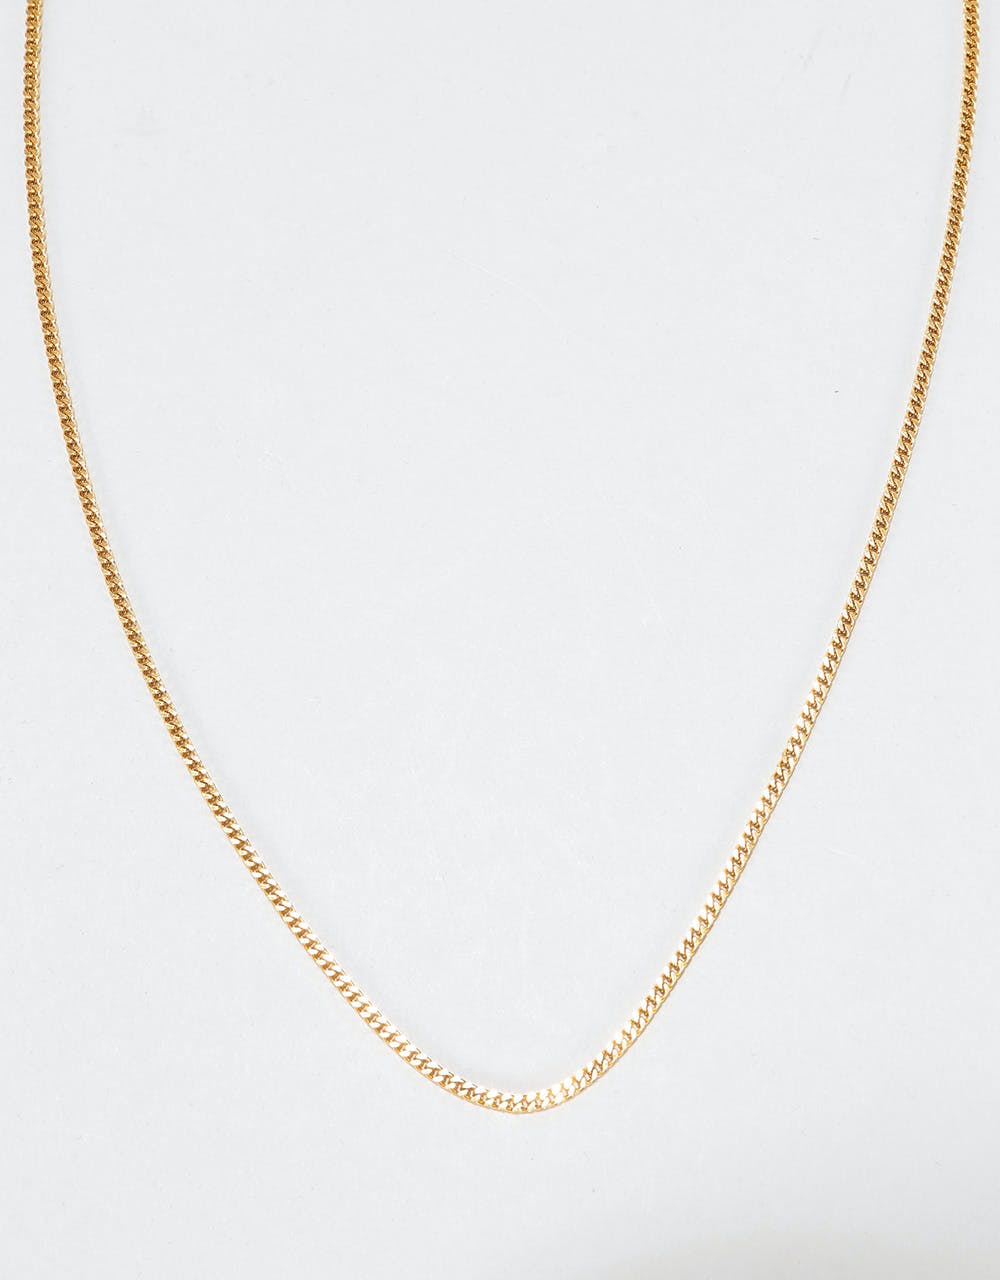 Midvs Co 18K Gold Plated 22" Franco Chain Necklace - Gold